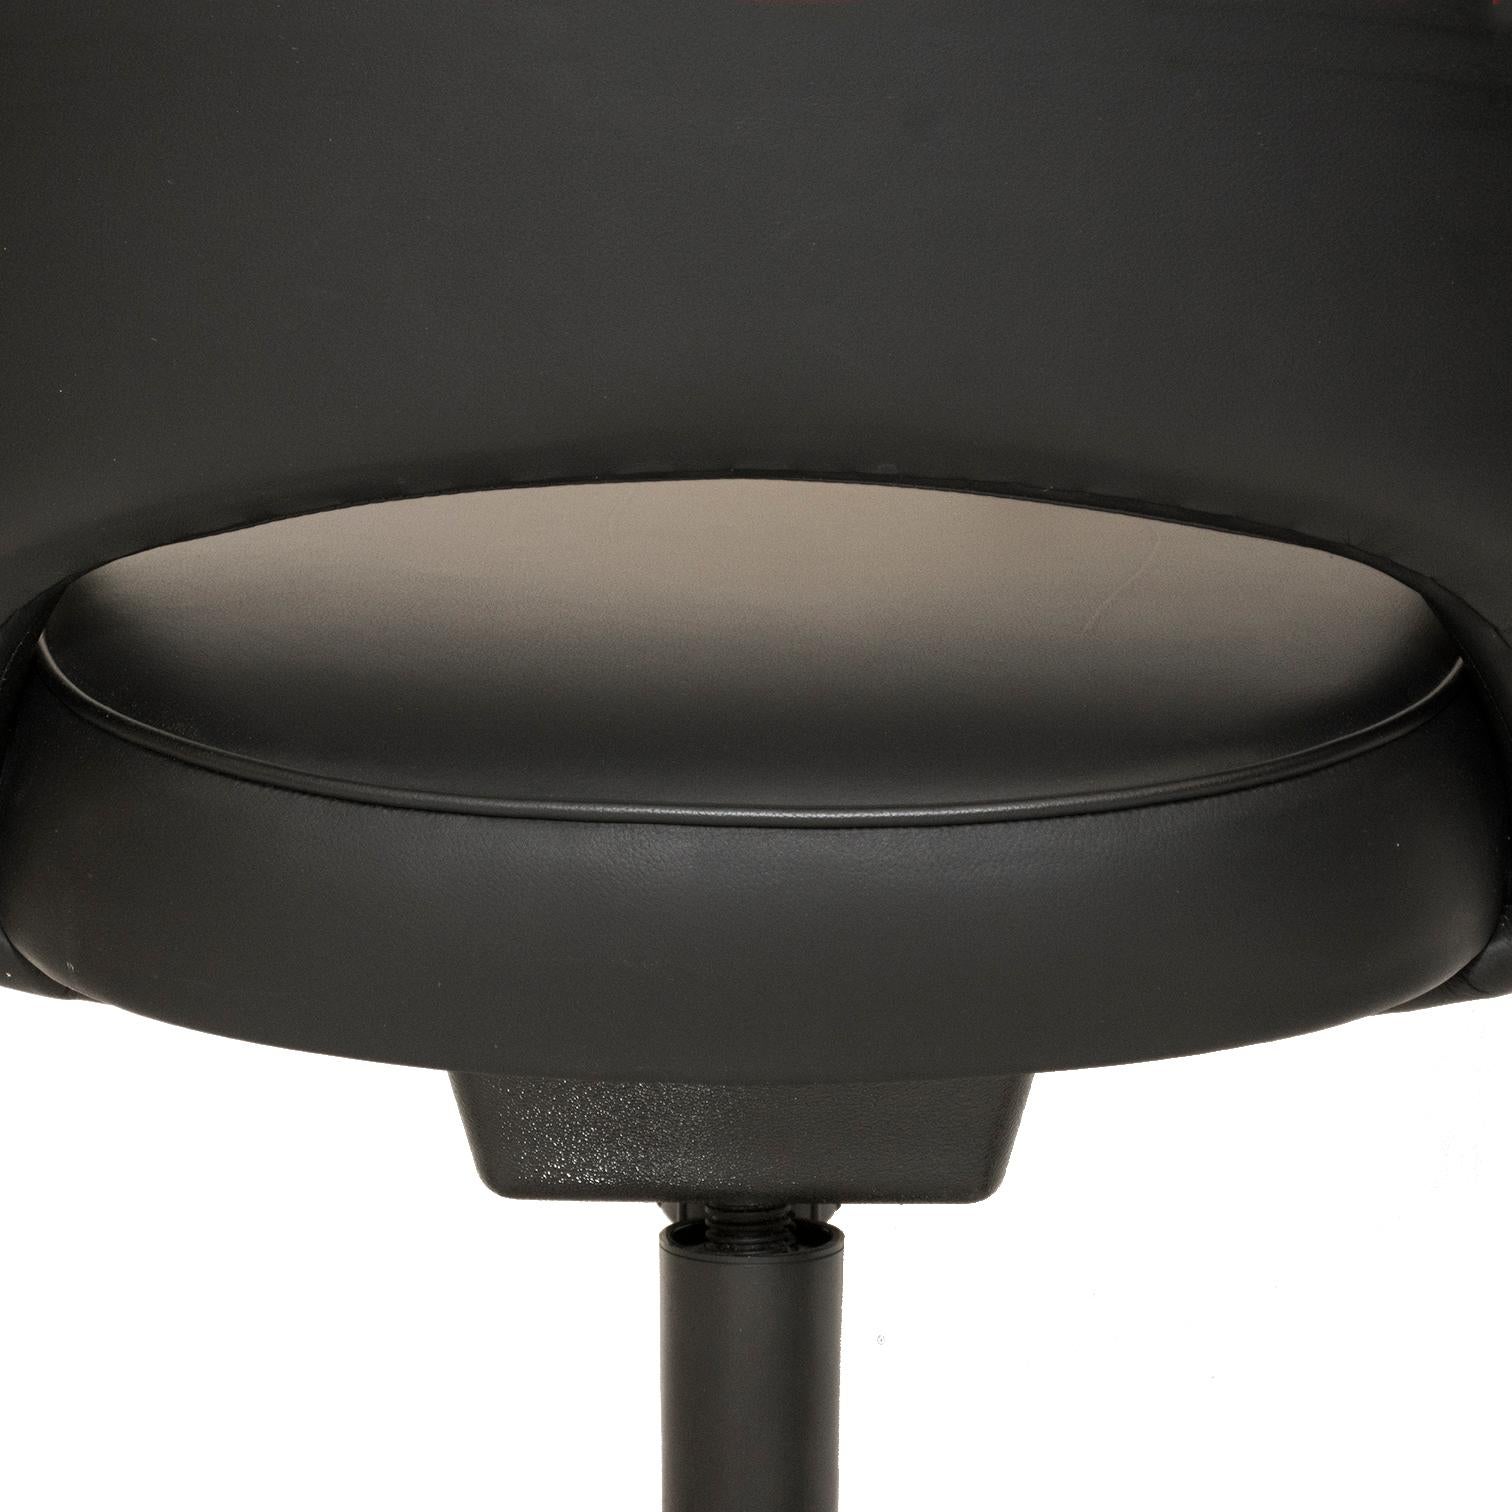 Late 20th Century Saarinen Executive Arm Chair in Original Black Leather, Contemporary Swivel Base For Sale